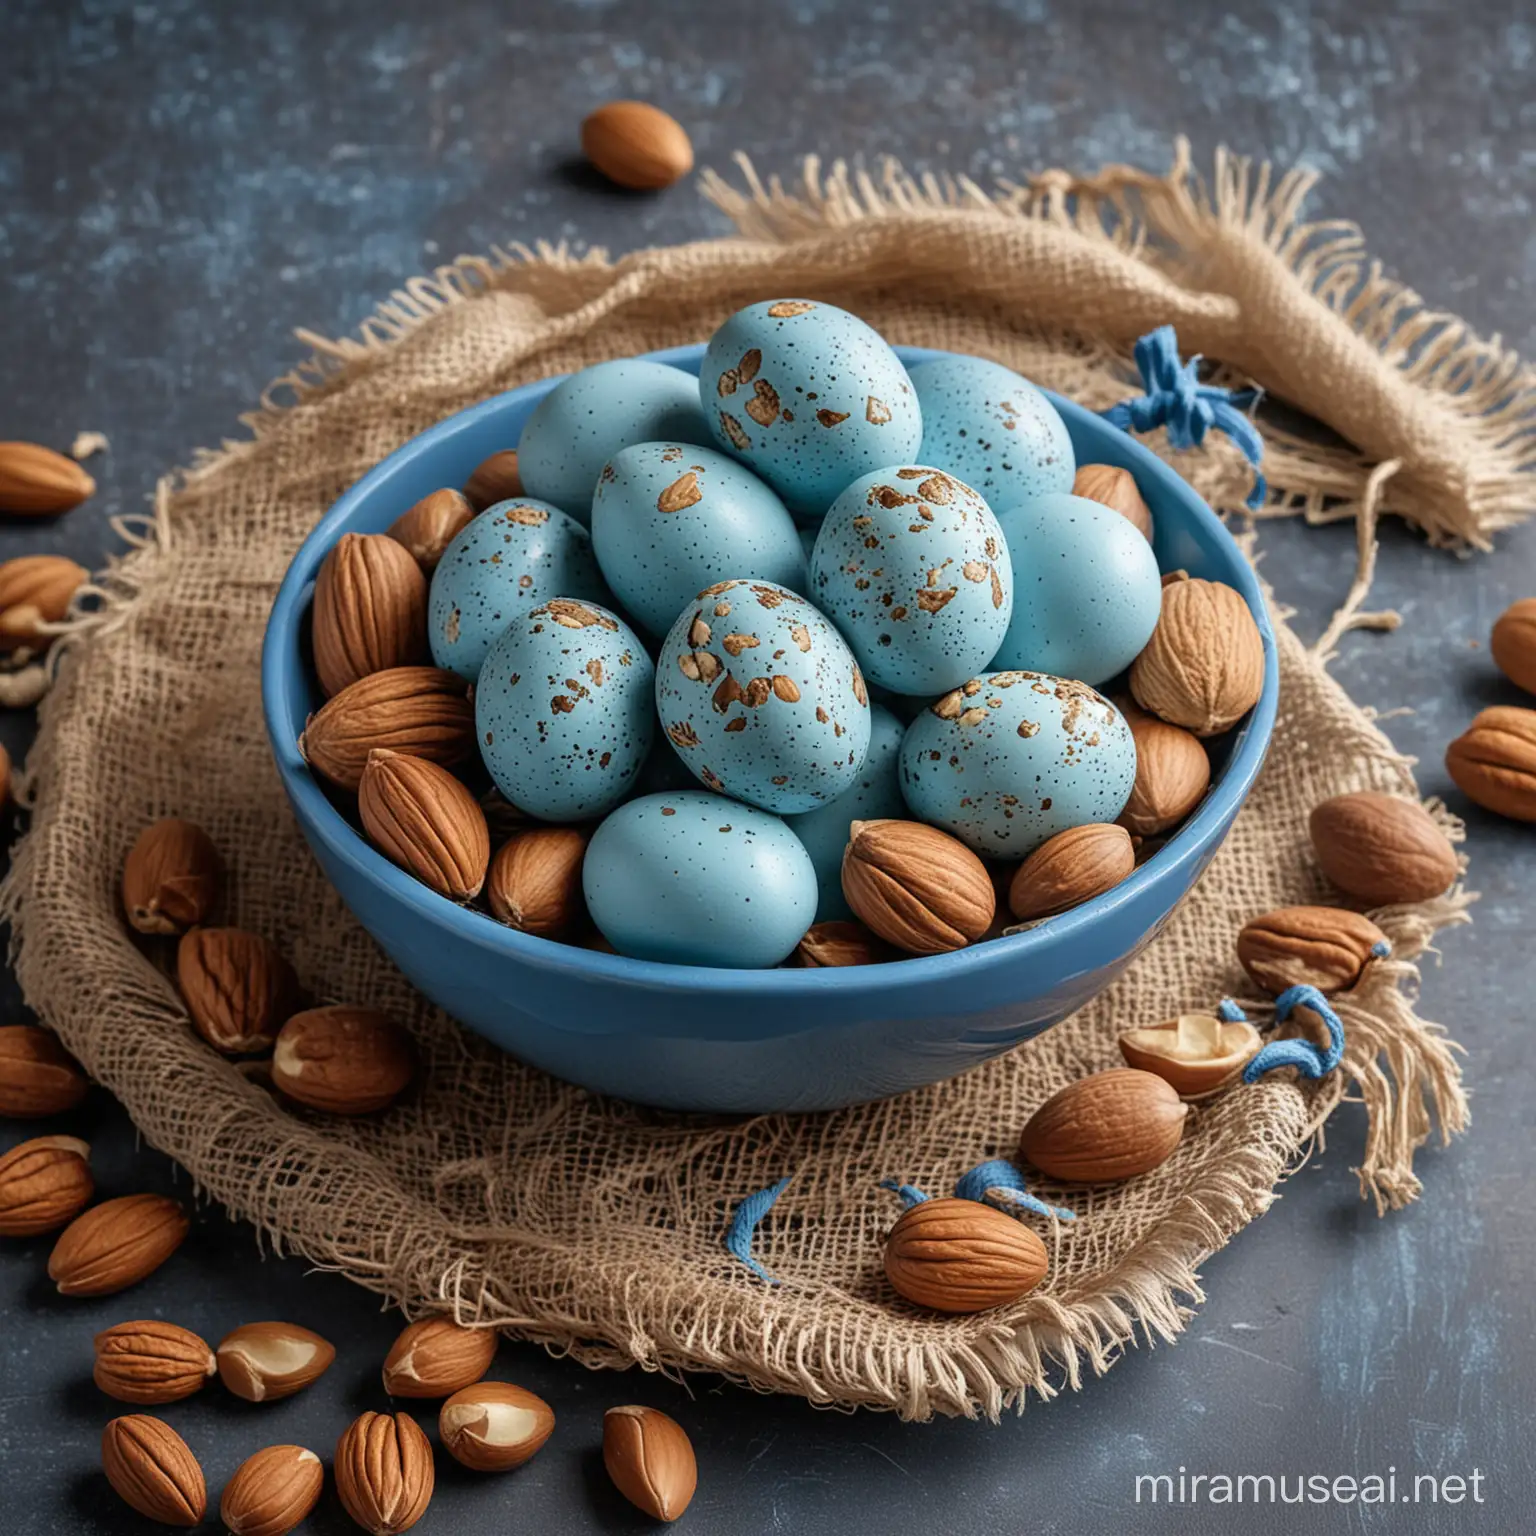 easter, blue eggs with roasted nuts inside, holding the eggs inside a blue bowl, various nuts types and shapes, nature backgrouund